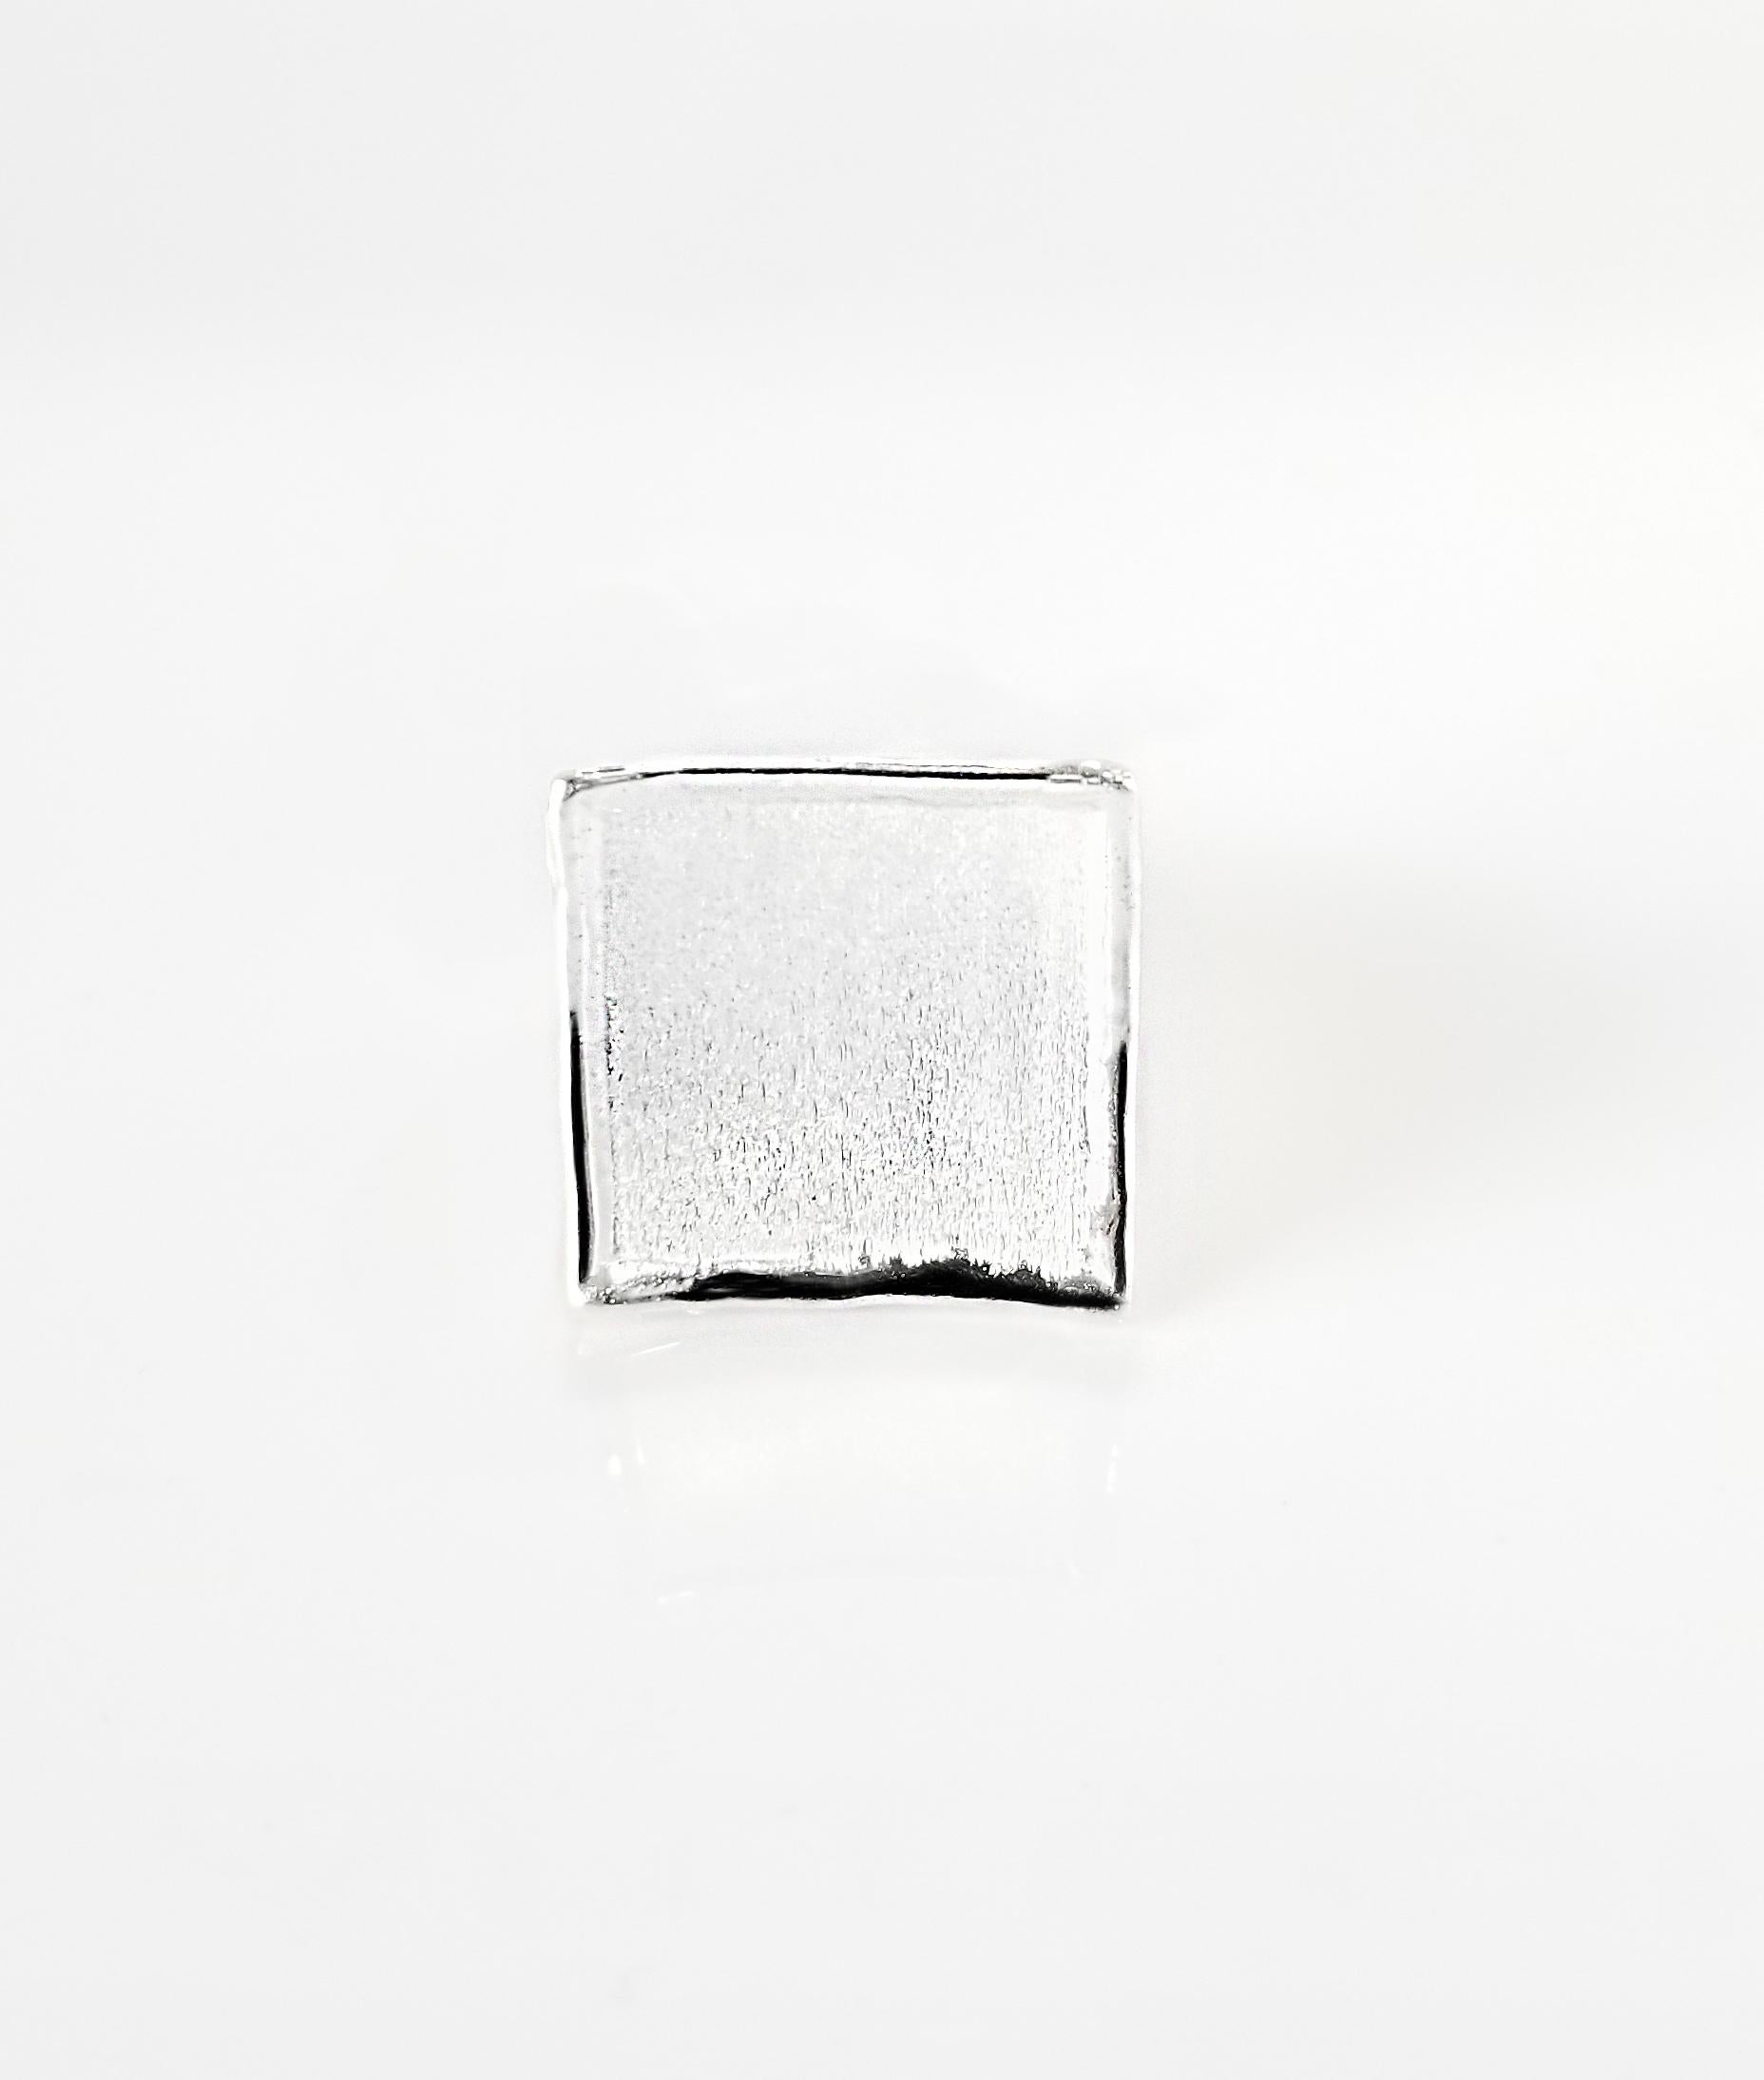 Yianni Creations Ammos Collection 100% handmade artisan ring from fine silver 950 purity plated with palladium to resist elements. This square shape ring combines mat brushed texture with shiny liquid edges. Contact us for free sizing or if you wish